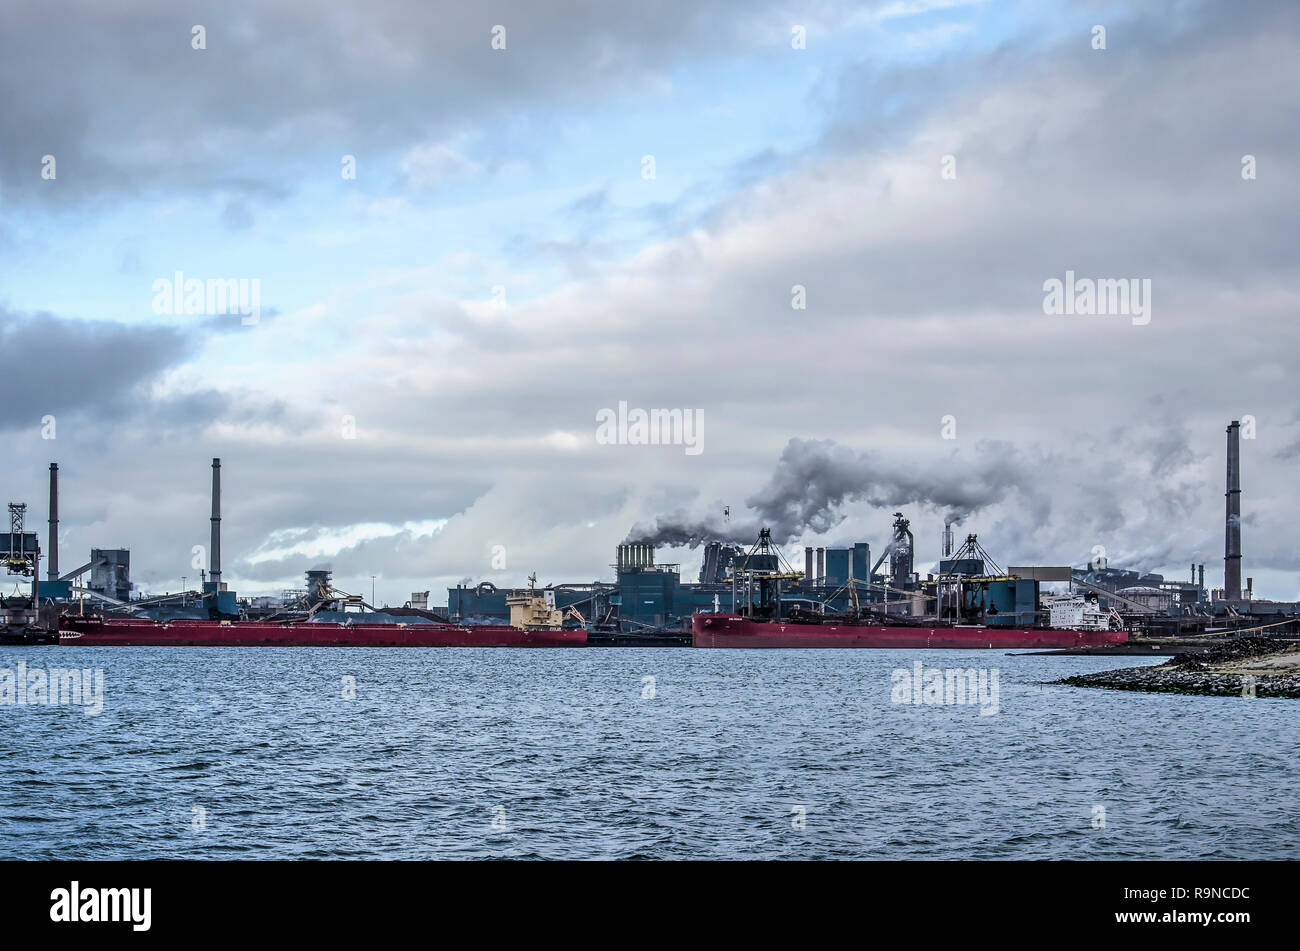 IJmuiden, The Netherlands, December 22, 2018: view across Northsea Canal towards the Tata steelworks under a dramatic sky Stock Photo